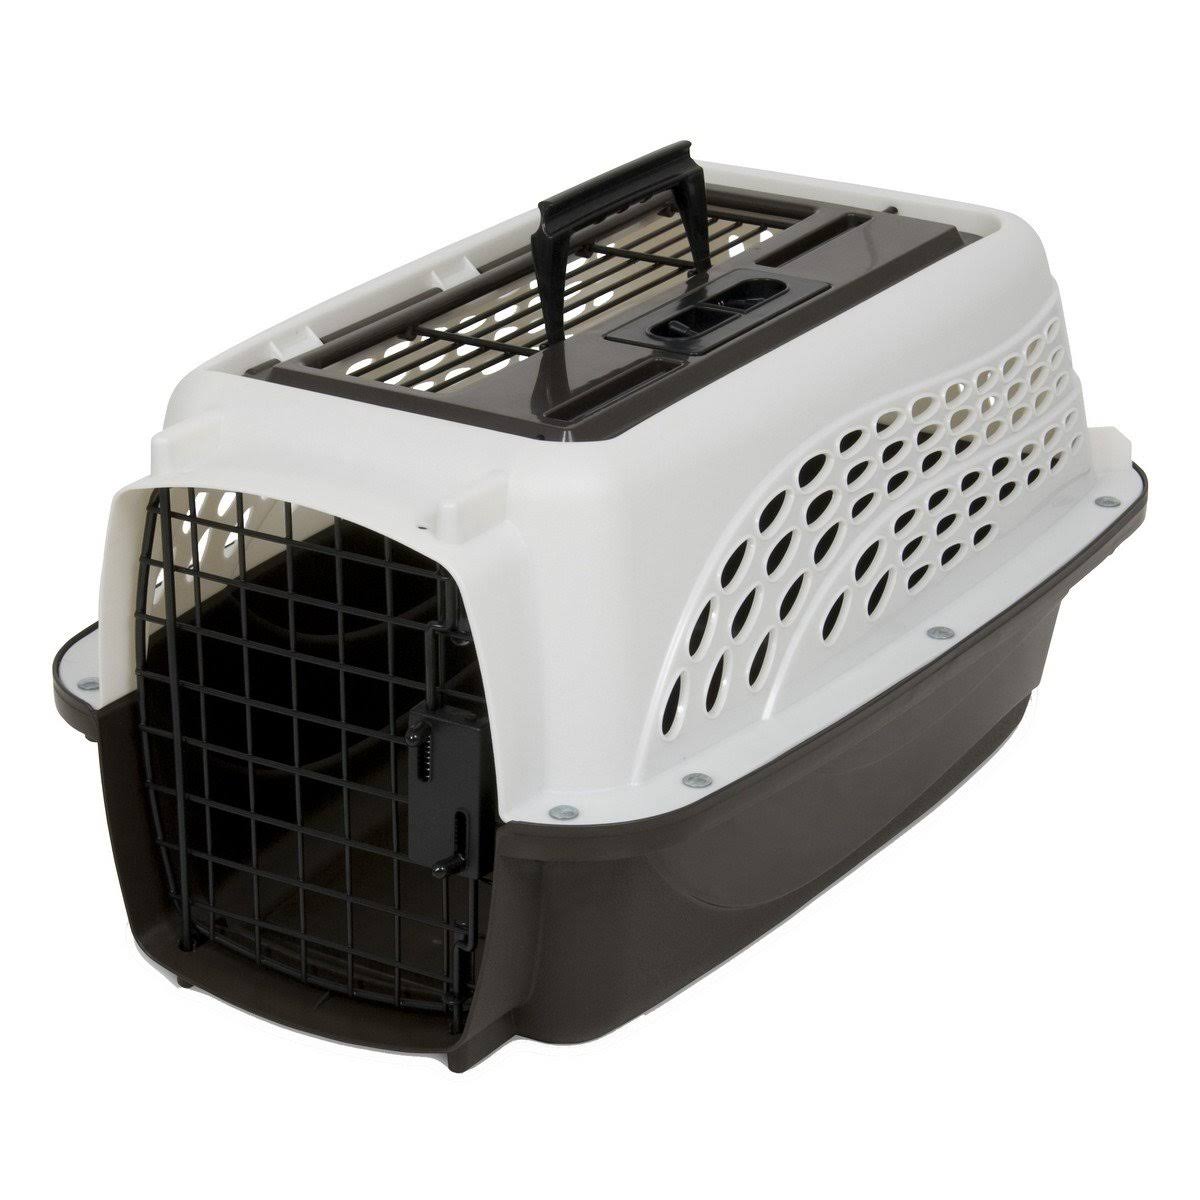 Petmate 2 Door Top Load Kennel Crate Carrier - Pearl White, 19"